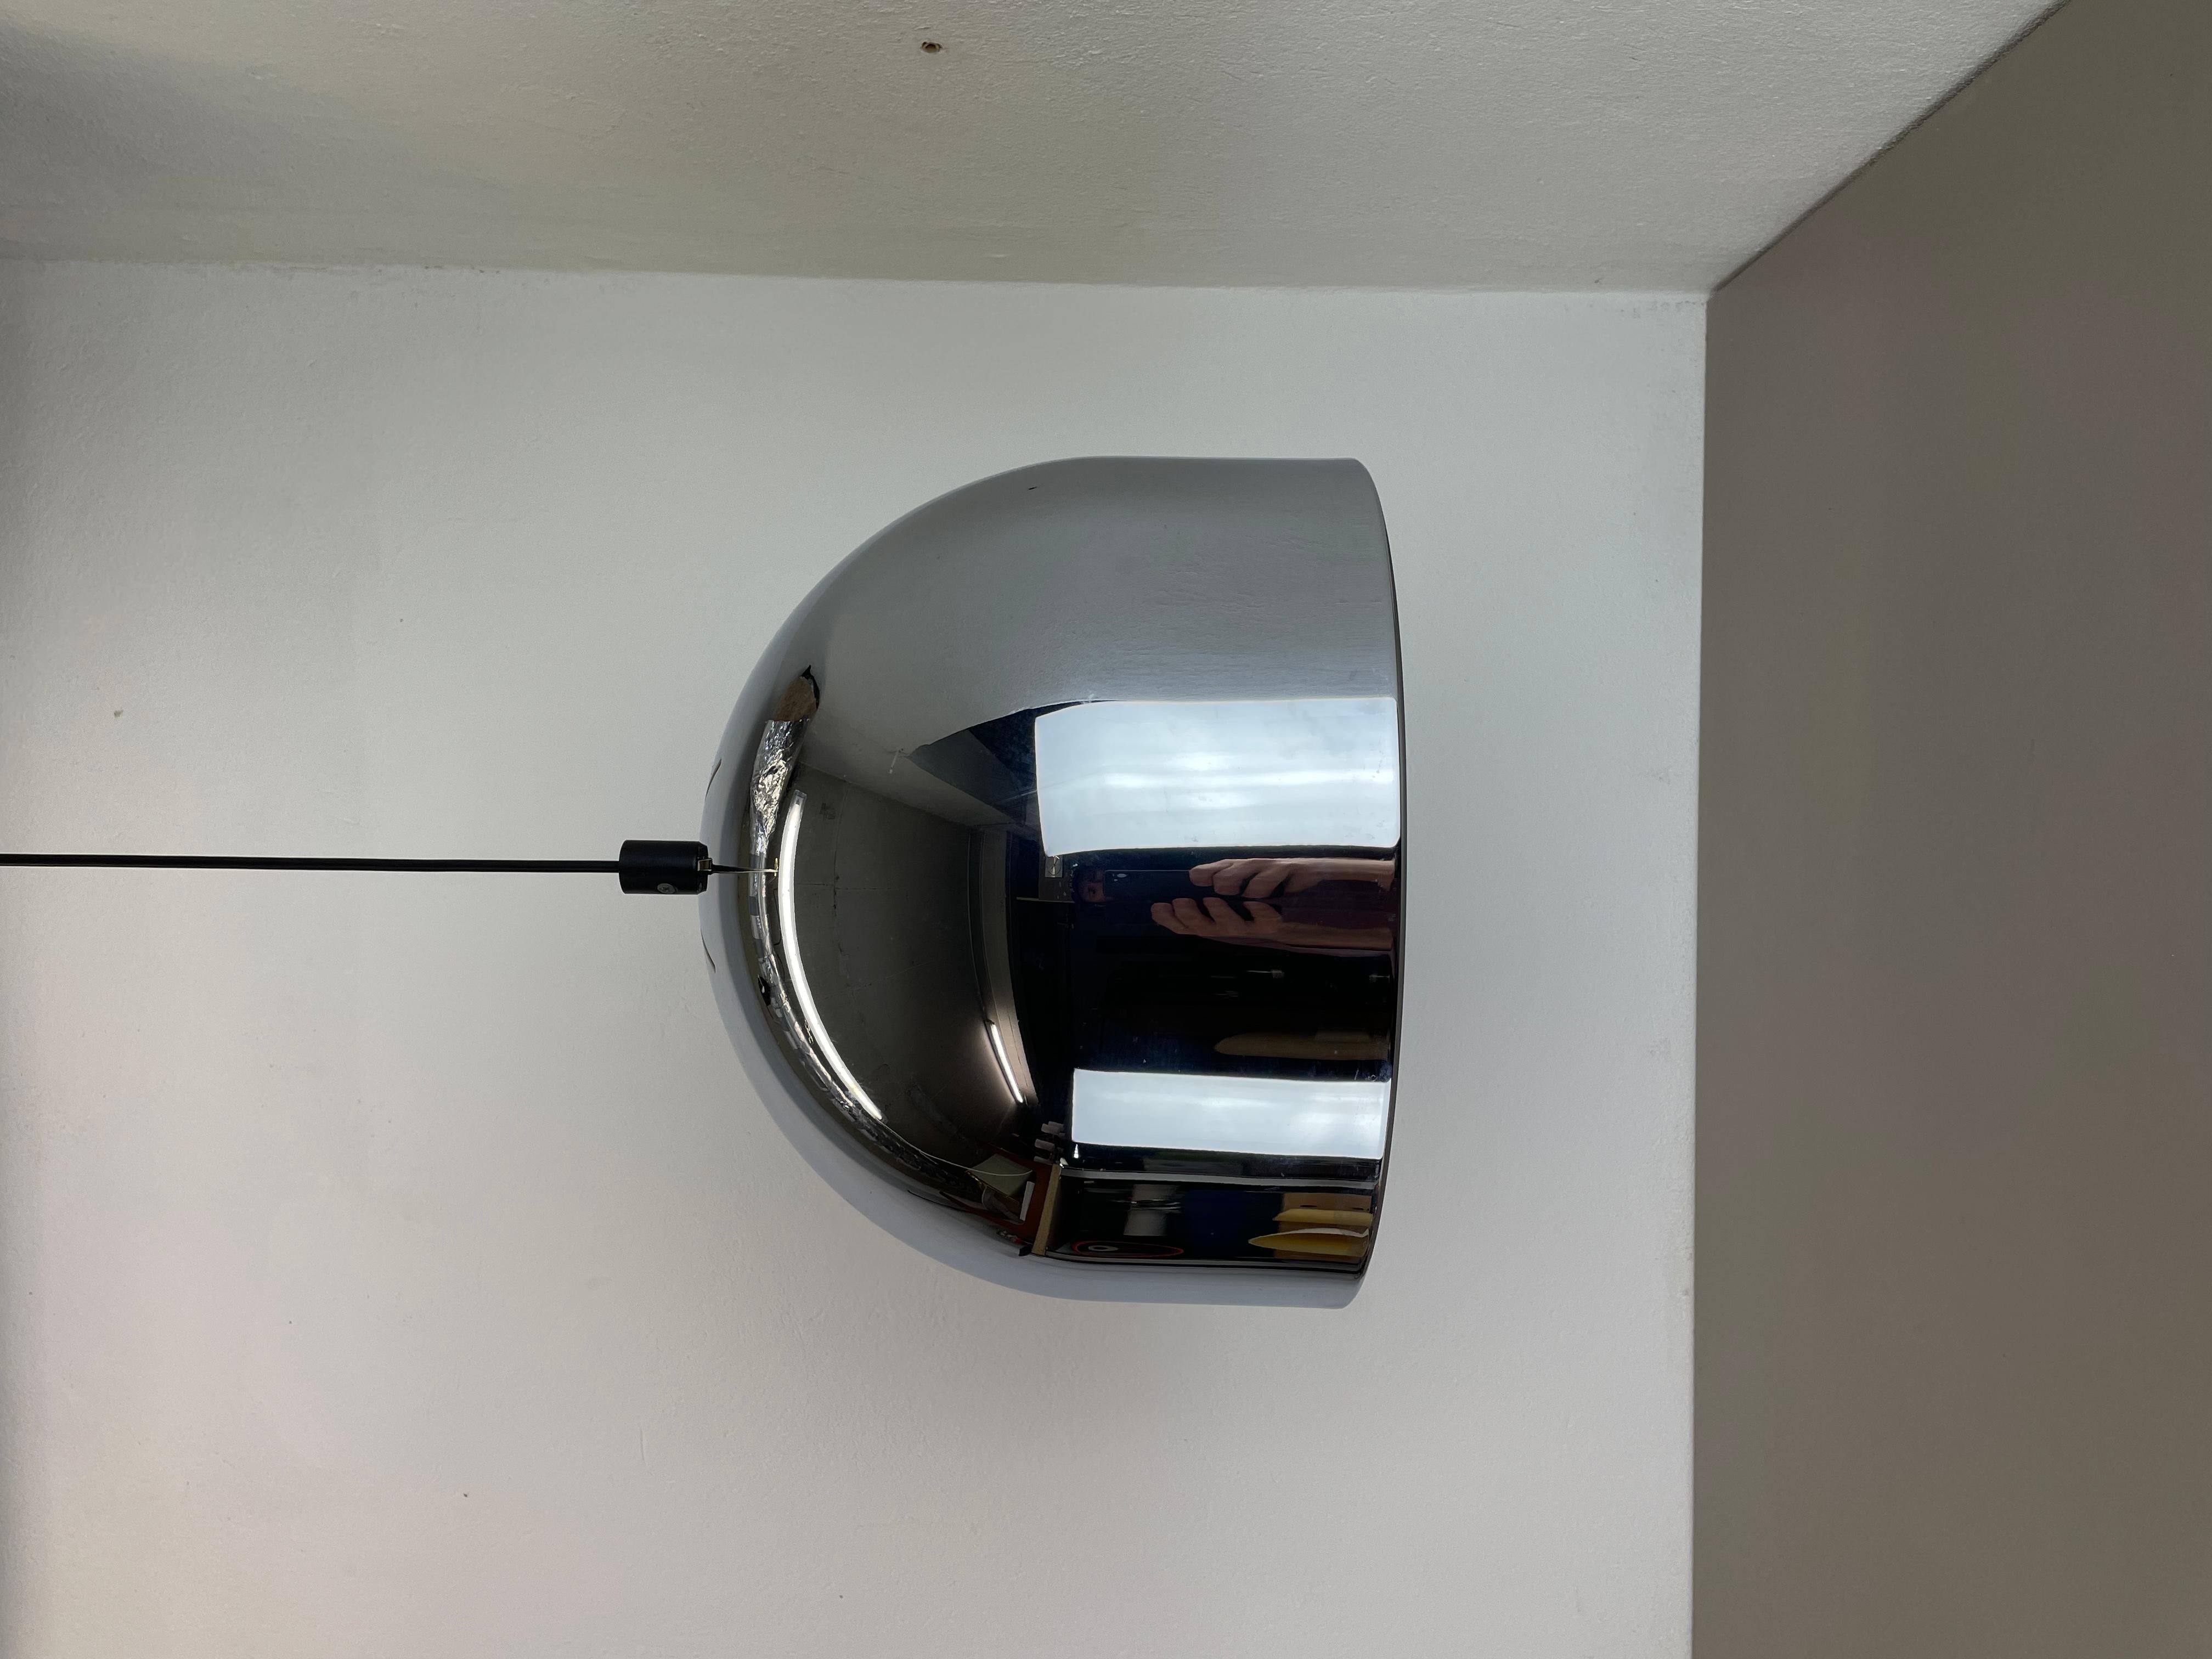 Xxl Chromed Metal Bubble Hanging Light by Rolf Krüger for Staff Lights, Germany In Good Condition For Sale In Kirchlengern, DE